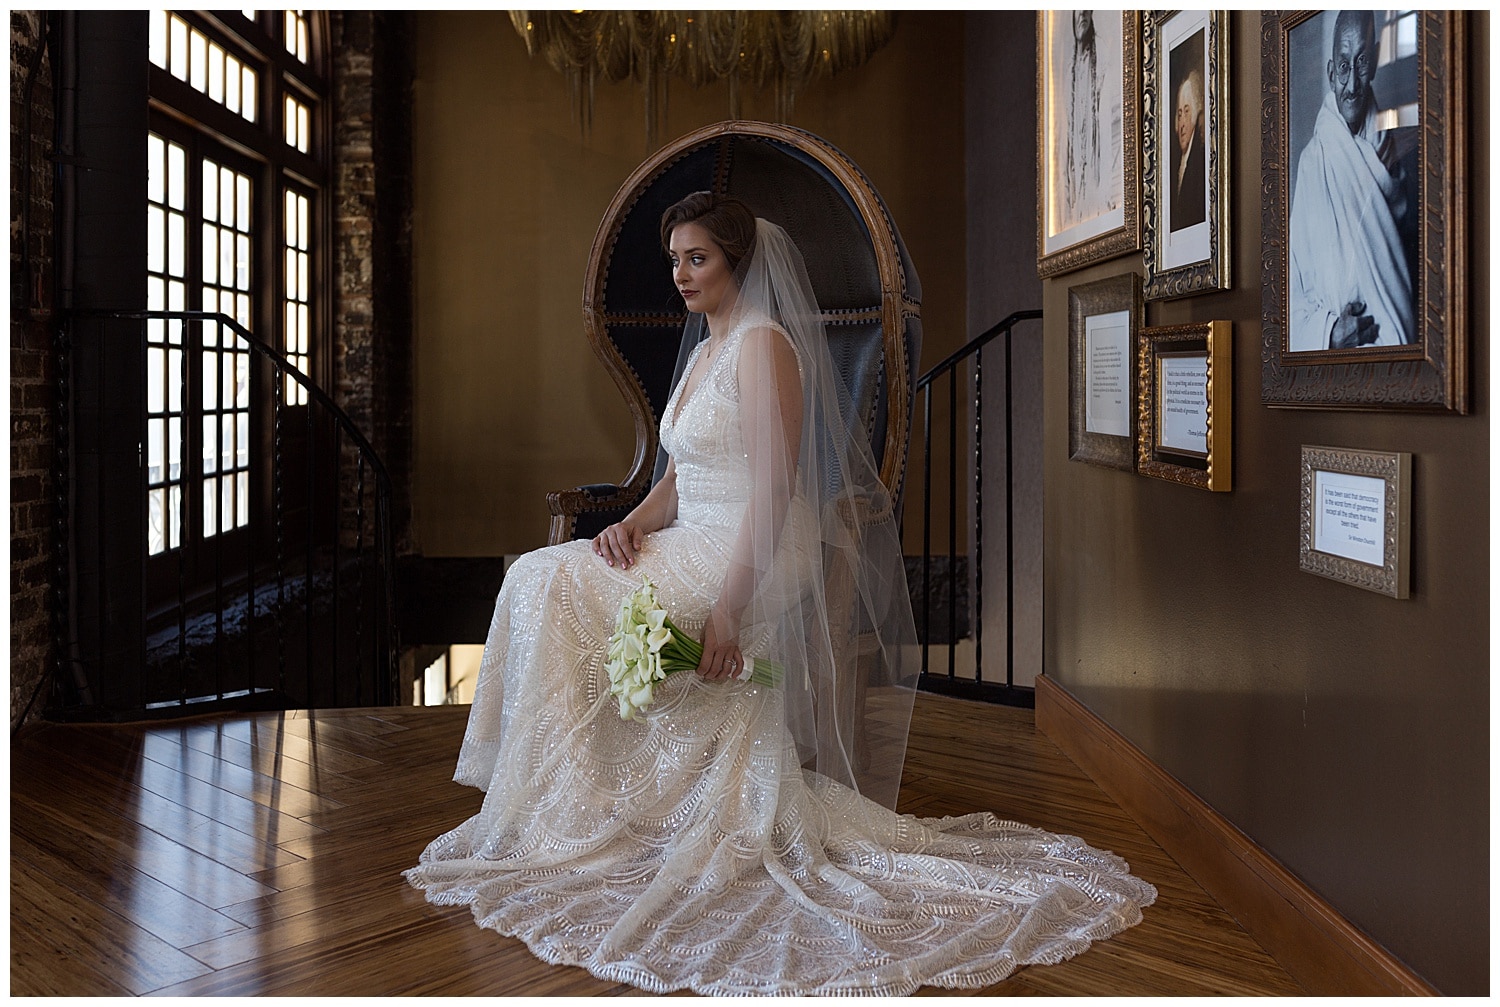 Bridal Session located at Lawless Spirits in Houston TX, featuring an Eddy K gown, captured by Swish and Click Photography